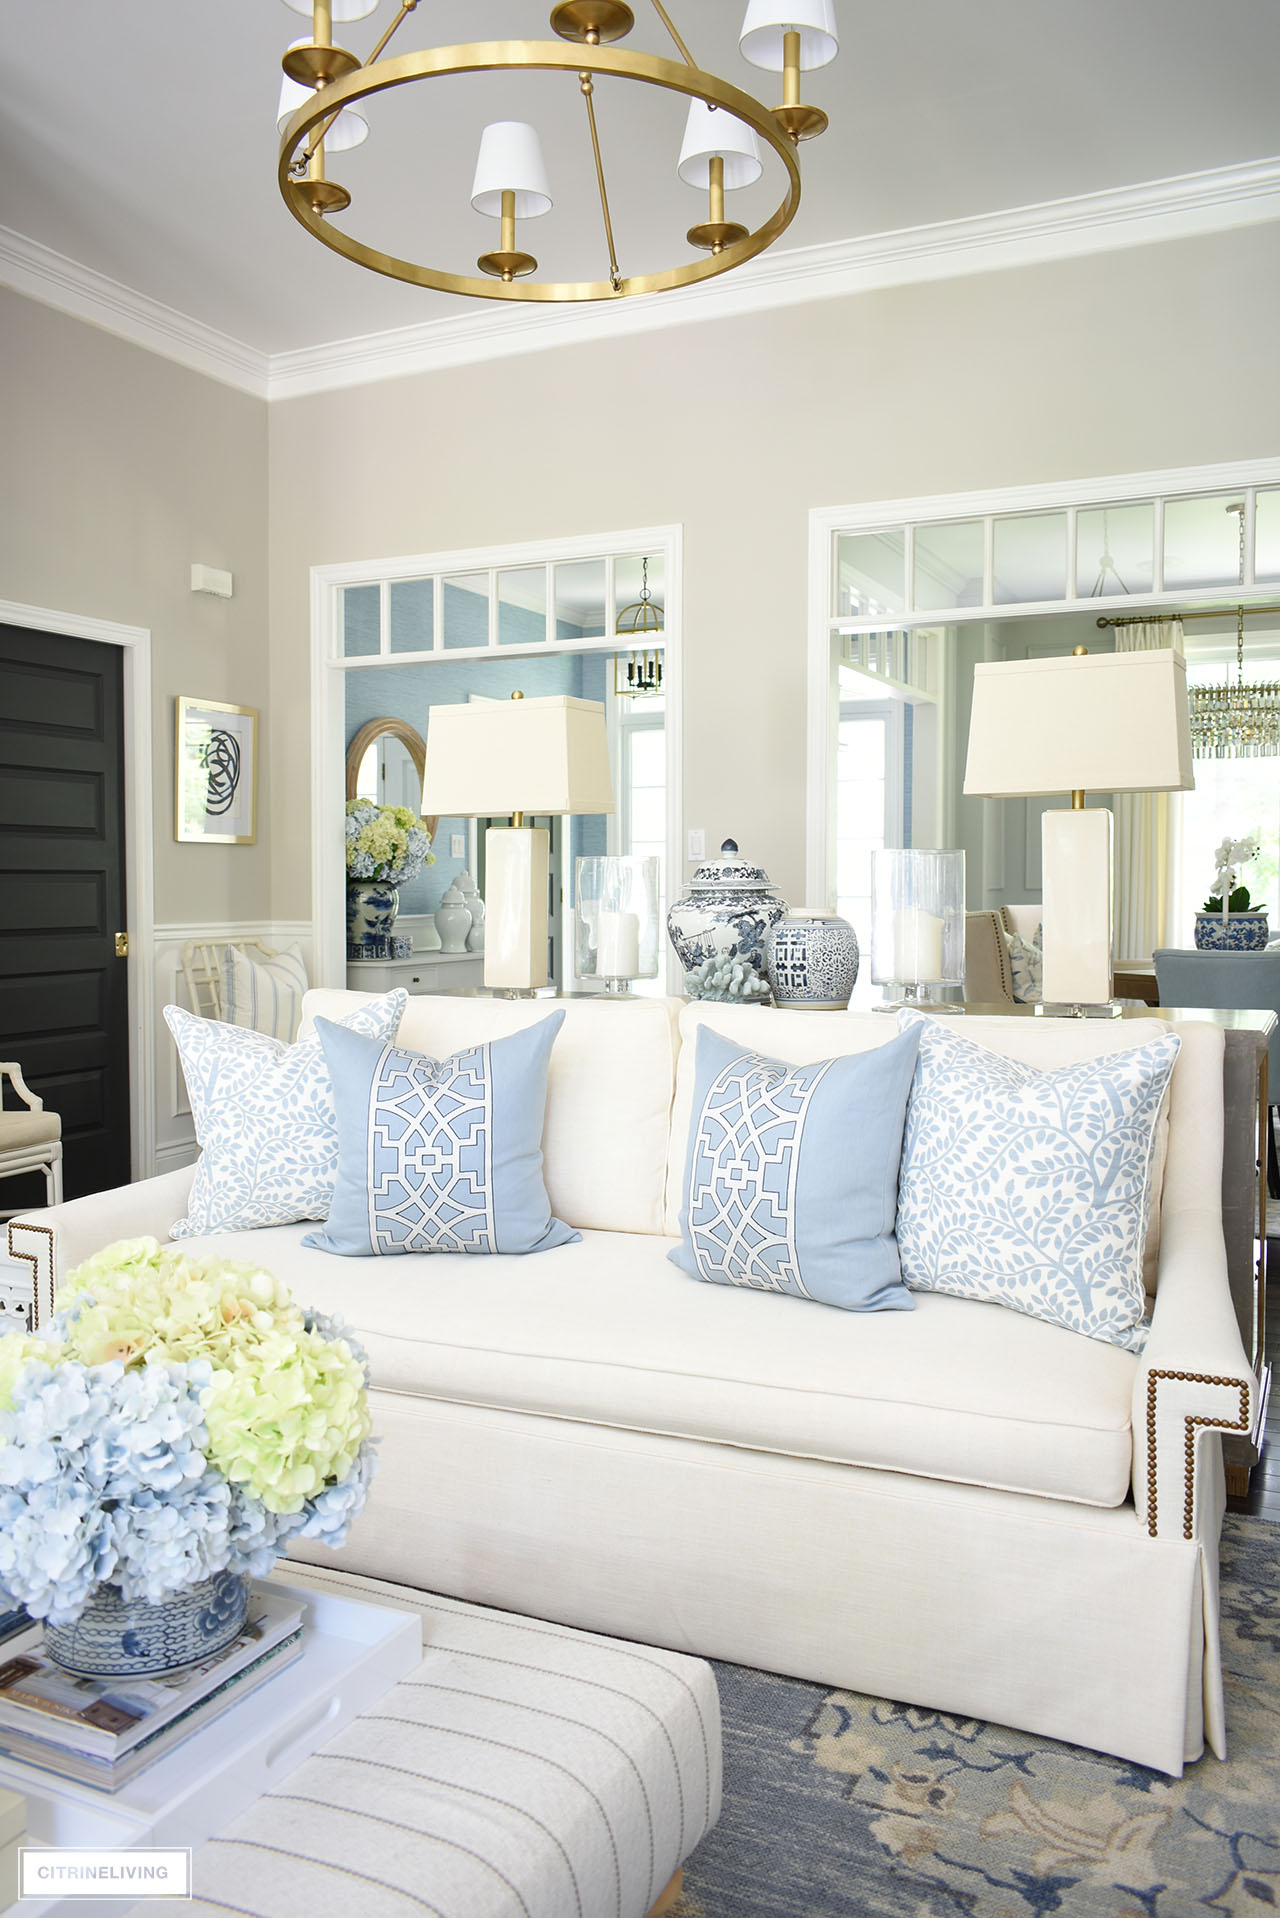 White sofas styled for summer with beautiful light blue and white pillows in chic chinoiserie prints.